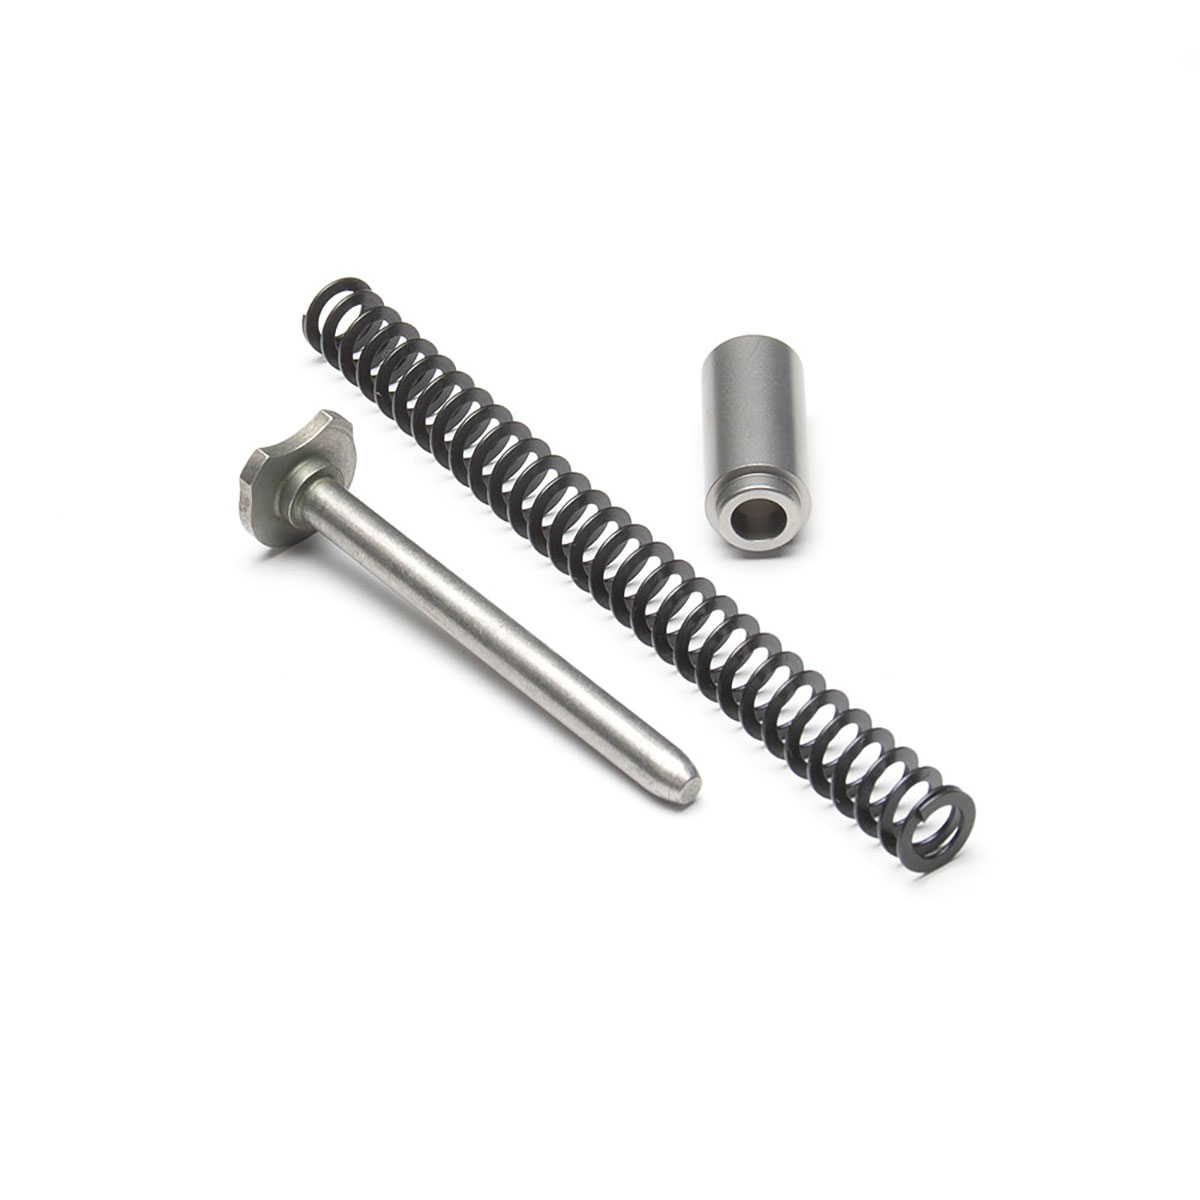 ED BROWN - 1911 45 ACP FLAT WIRE RECOIL SPRING SYSTEM